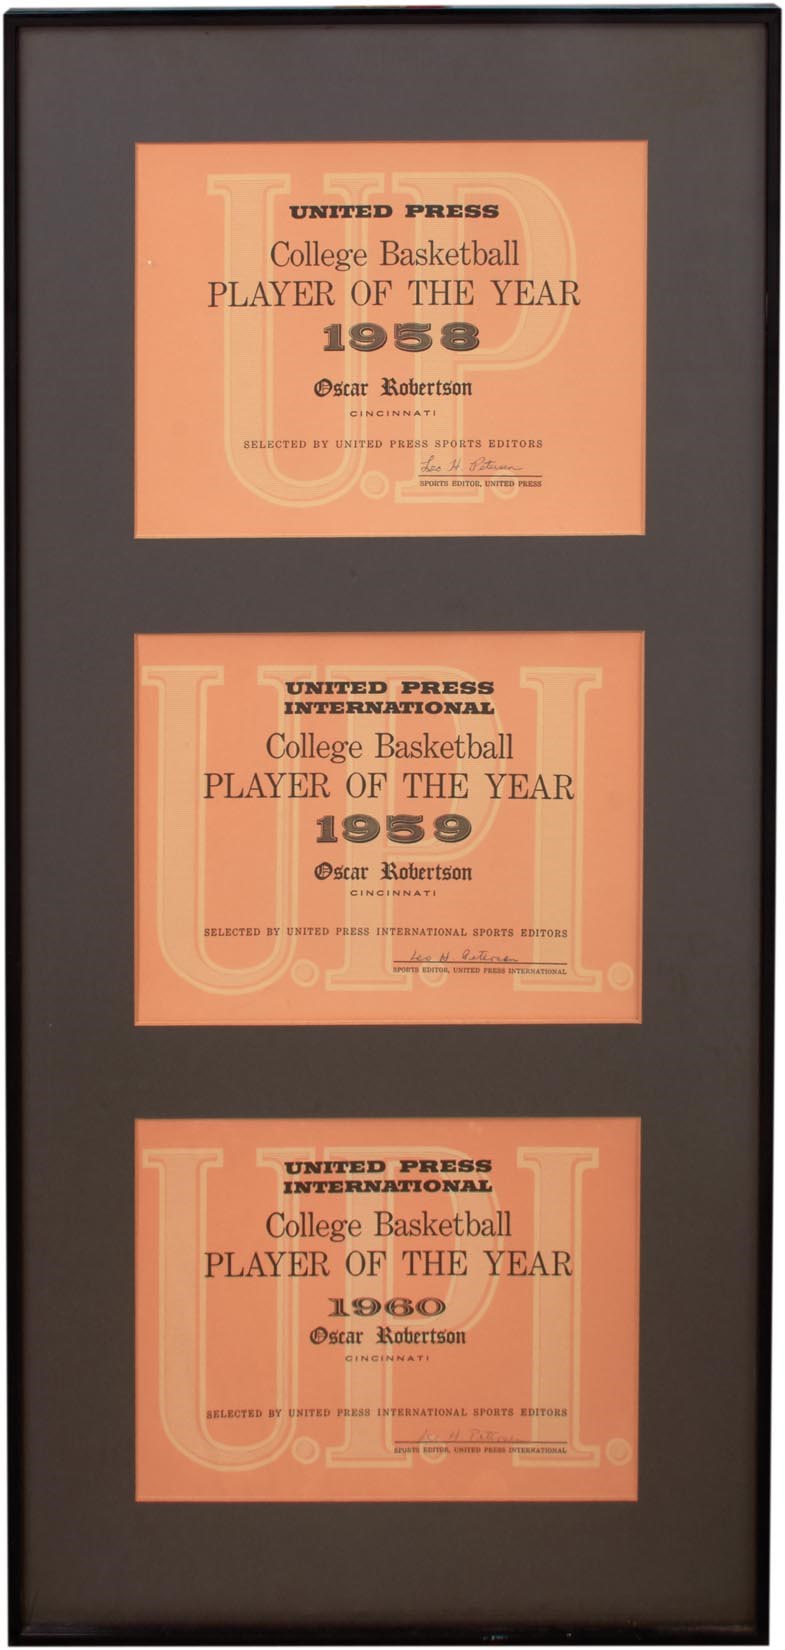 - 1958, 1959 and 1960 Oscar Robertson UPI College Player of the Year Awards